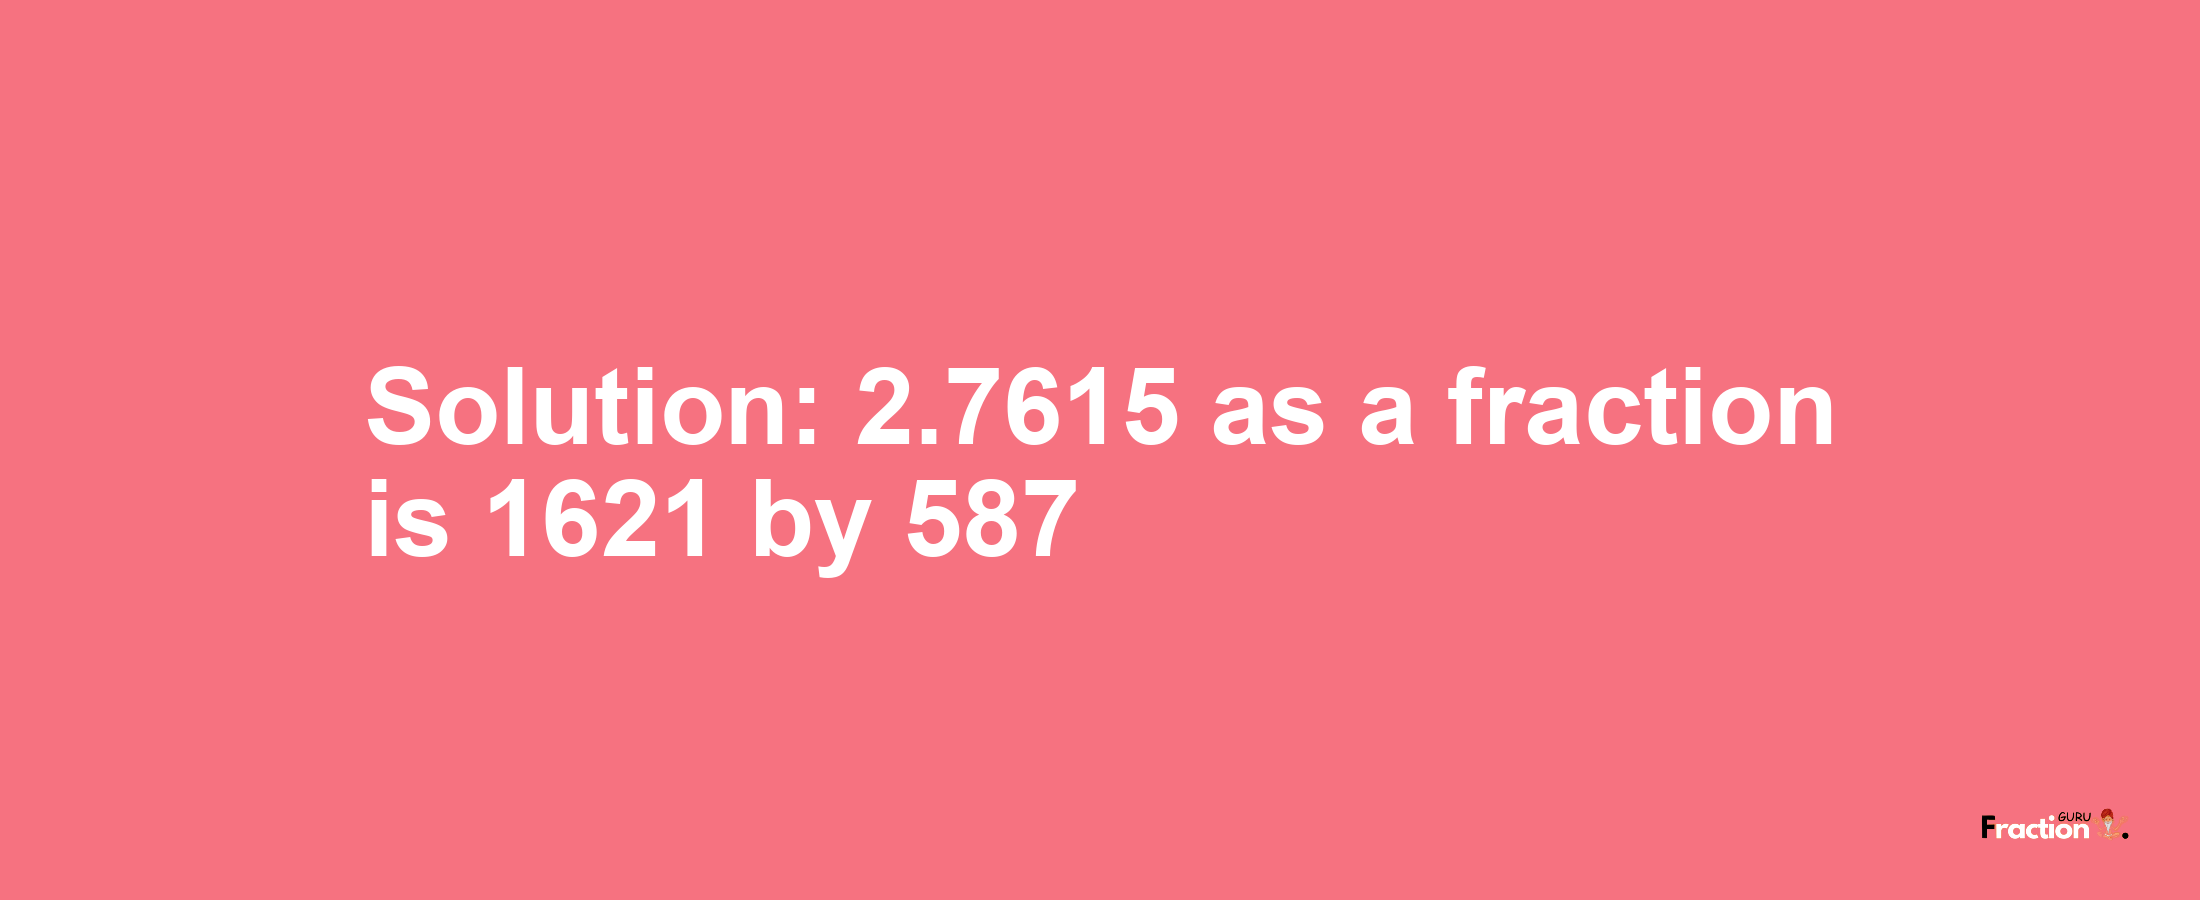 Solution:2.7615 as a fraction is 1621/587